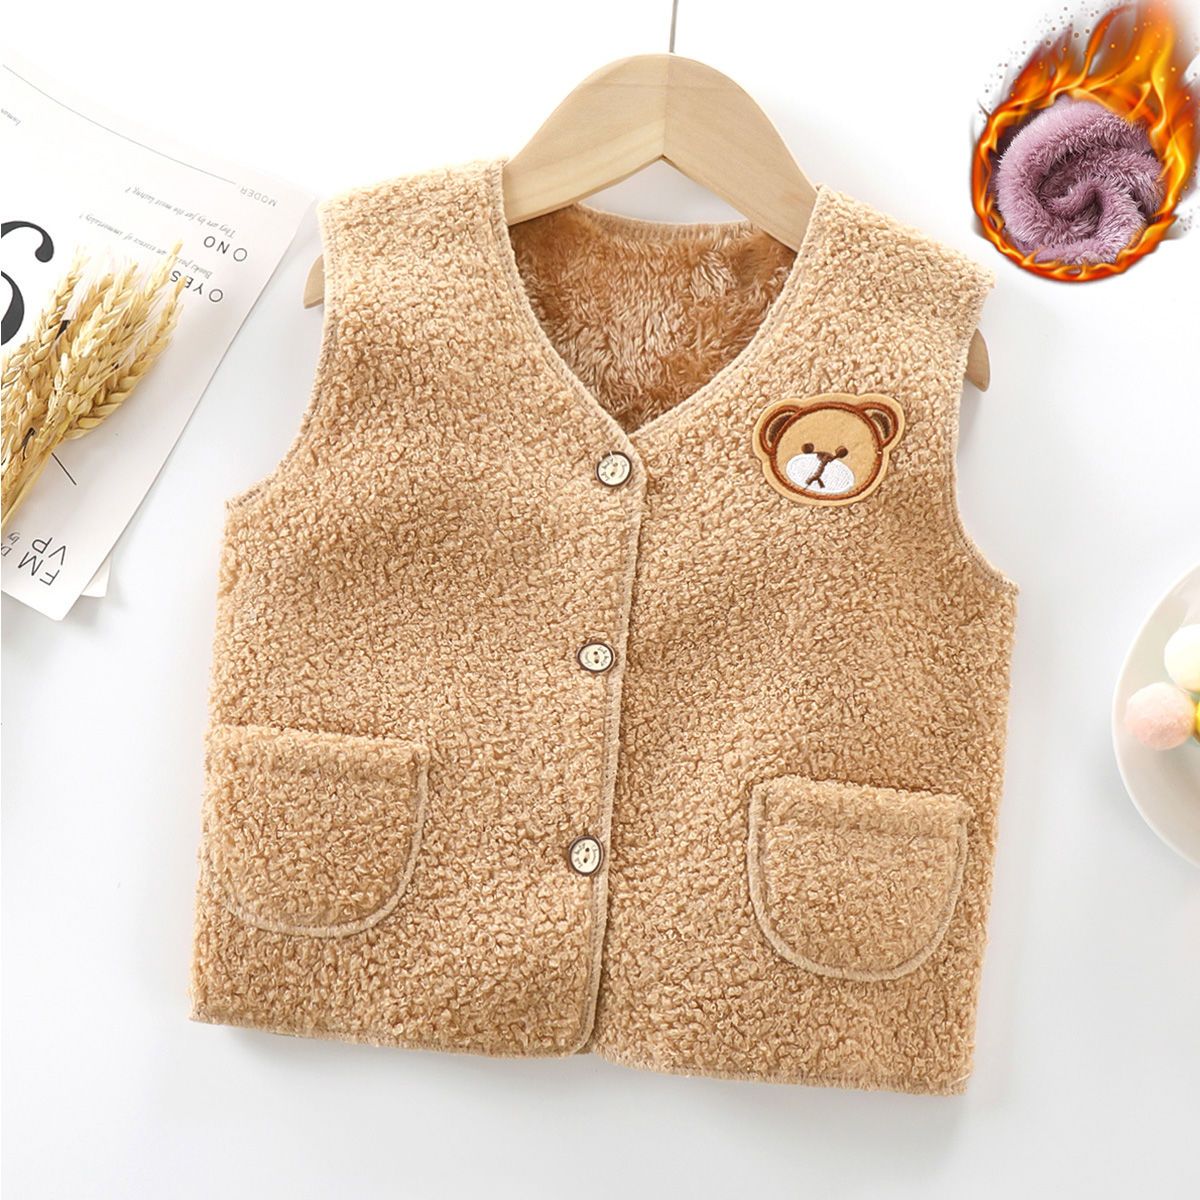  new children's lamb velvet vest thick spring and autumn baby warm cotton vest boys and girls wear inside and outside the tide